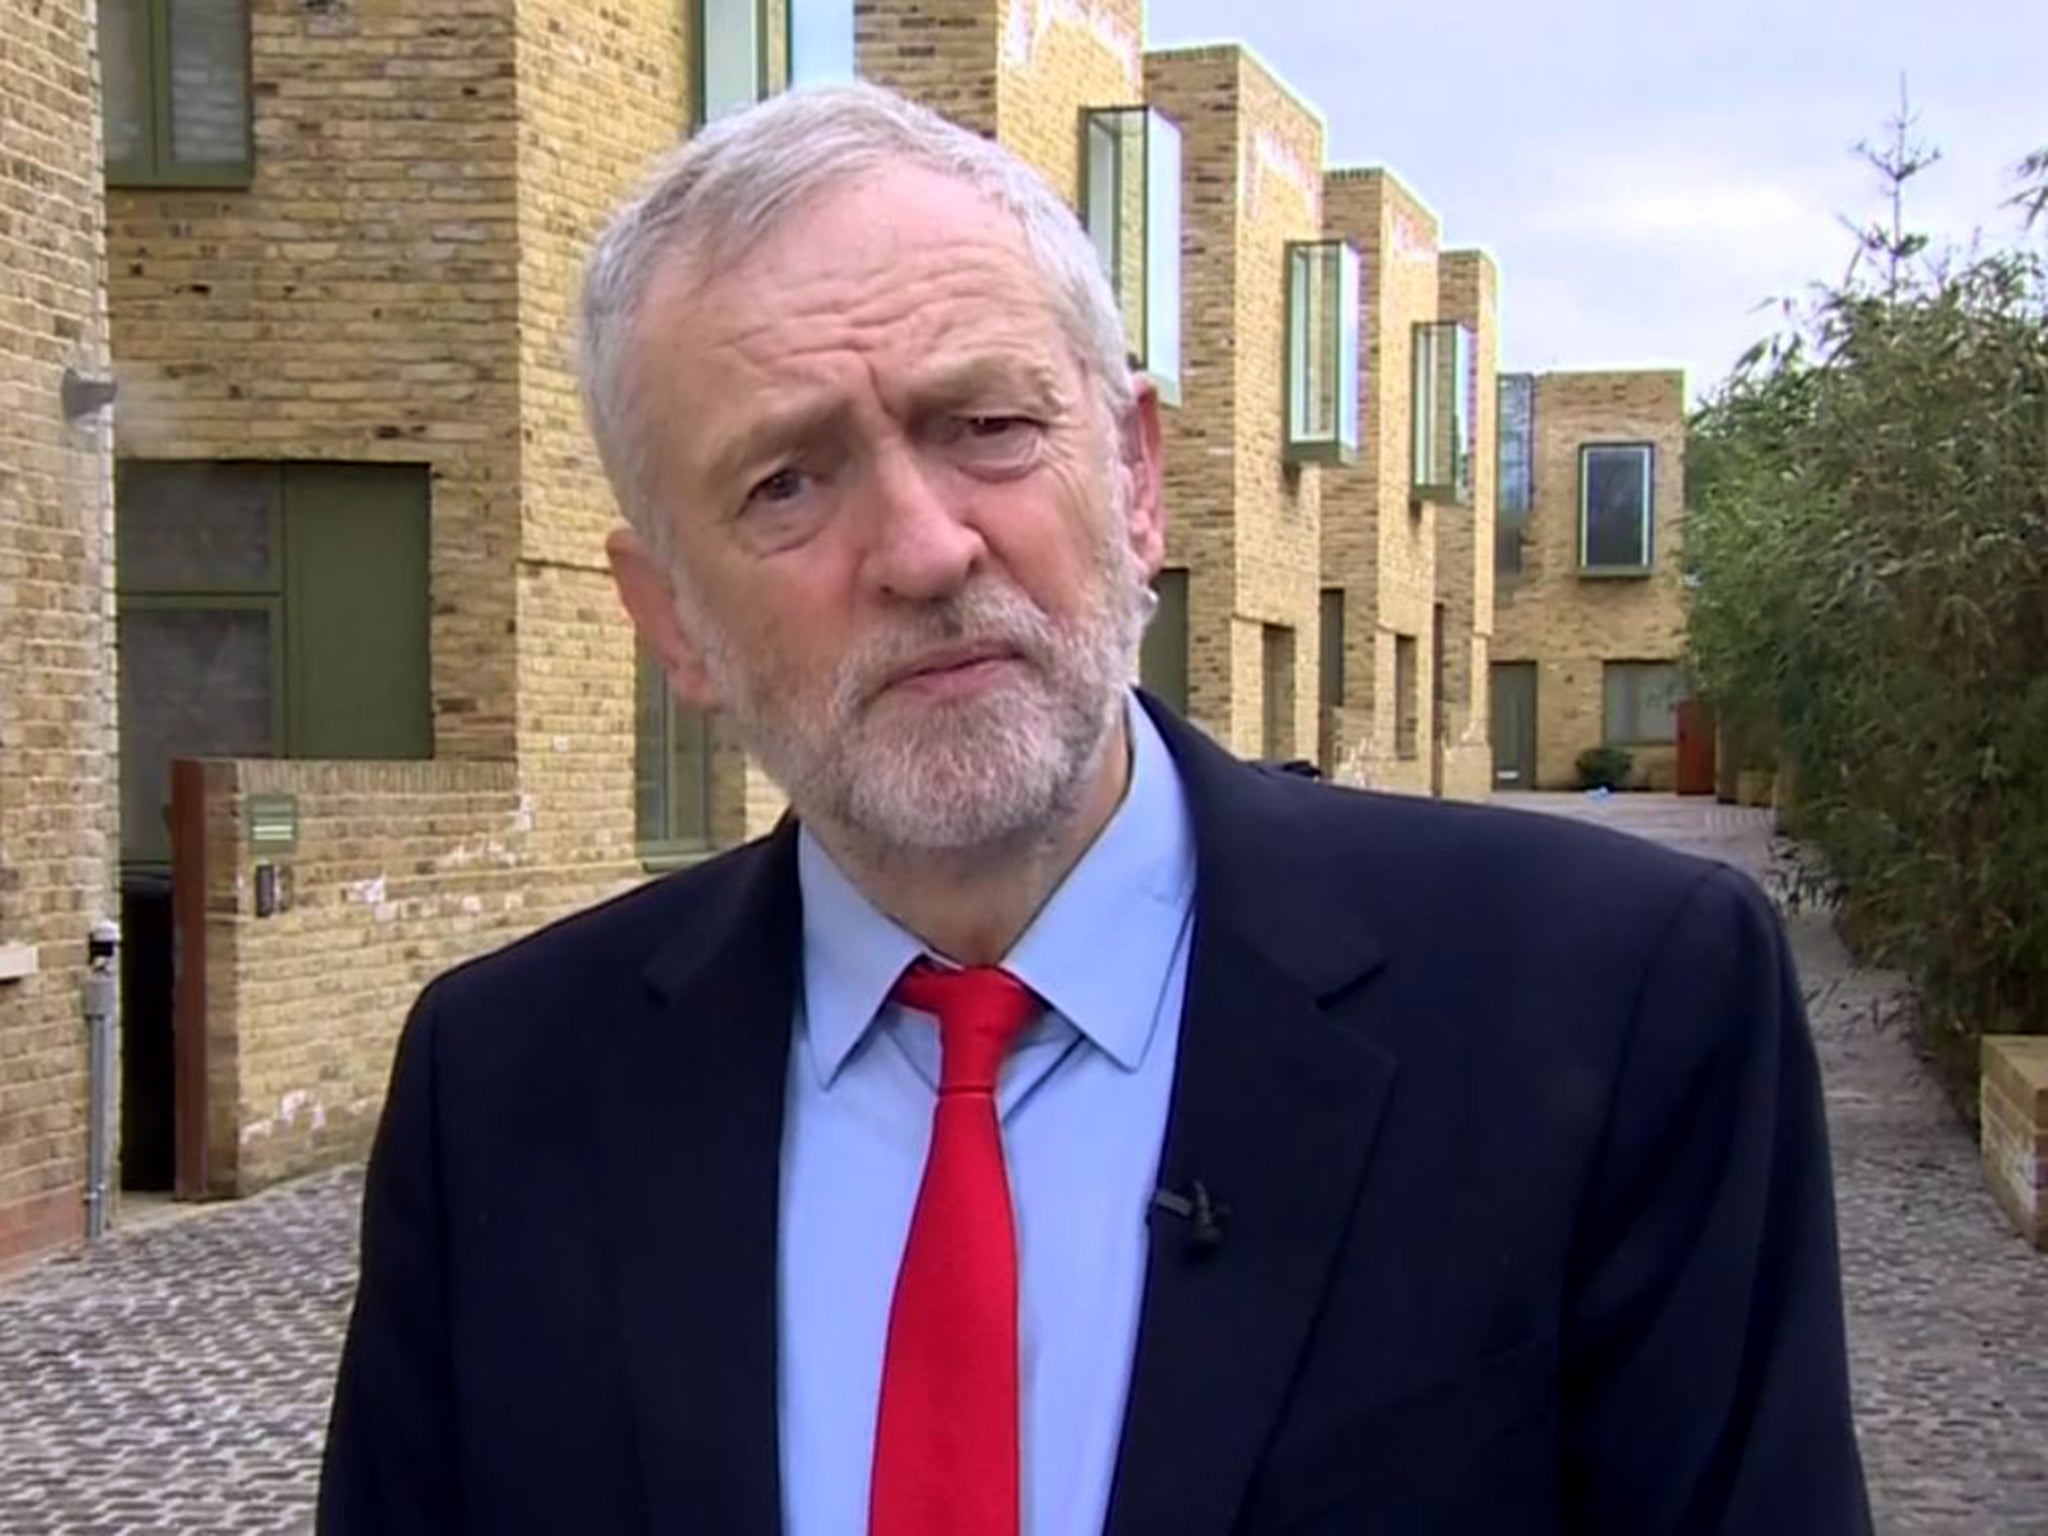 Corbyn made the comments on the ‘Victoria Derbyshire’ programme